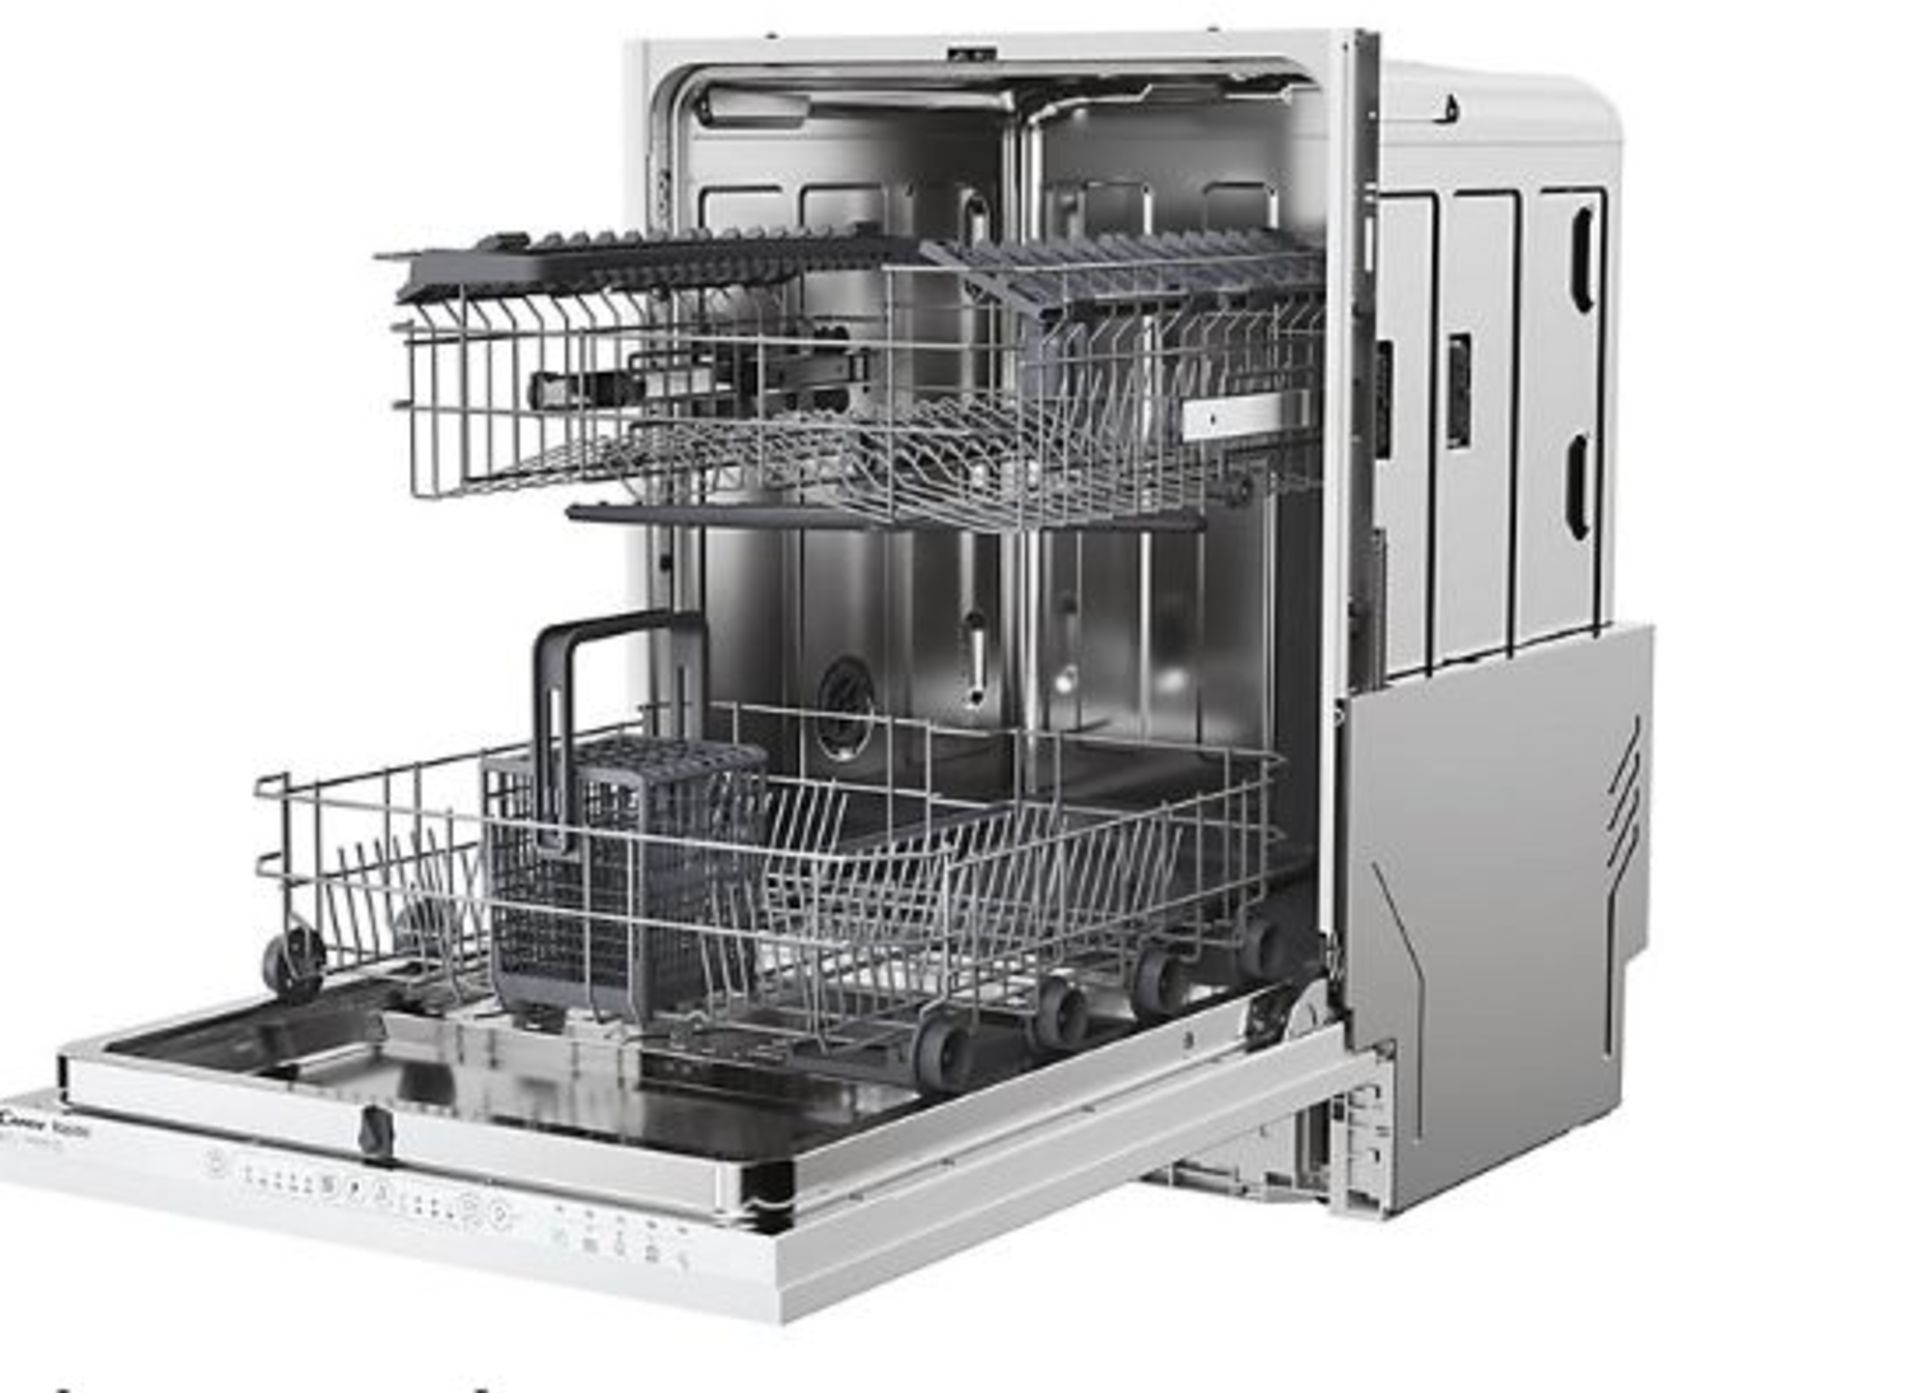 Candy CI 3E53E0W1-80 Integrated Full size Dishwasher - White. - S2. RRP £416.00. Candy Rapido' is - Image 2 of 2